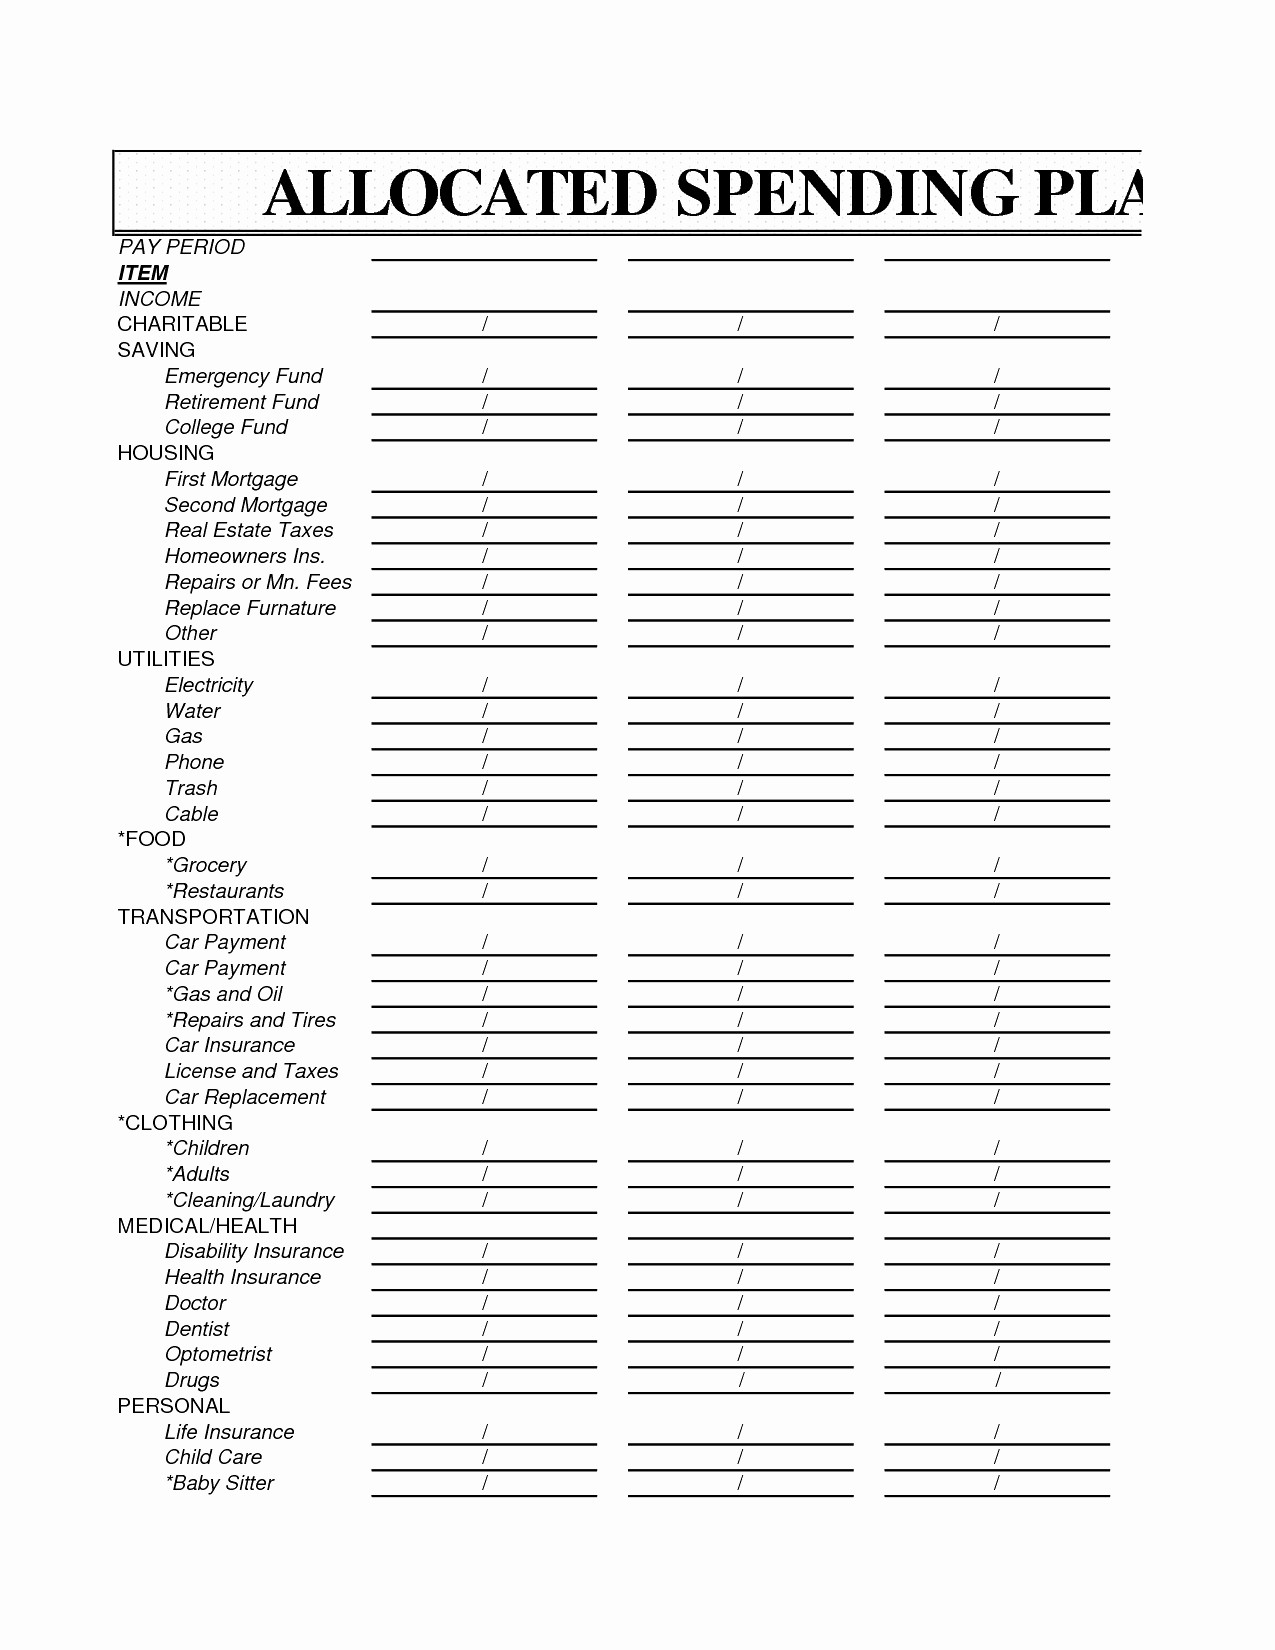 Allocated Spending Plan Form Awesome Dave Ramsey Document